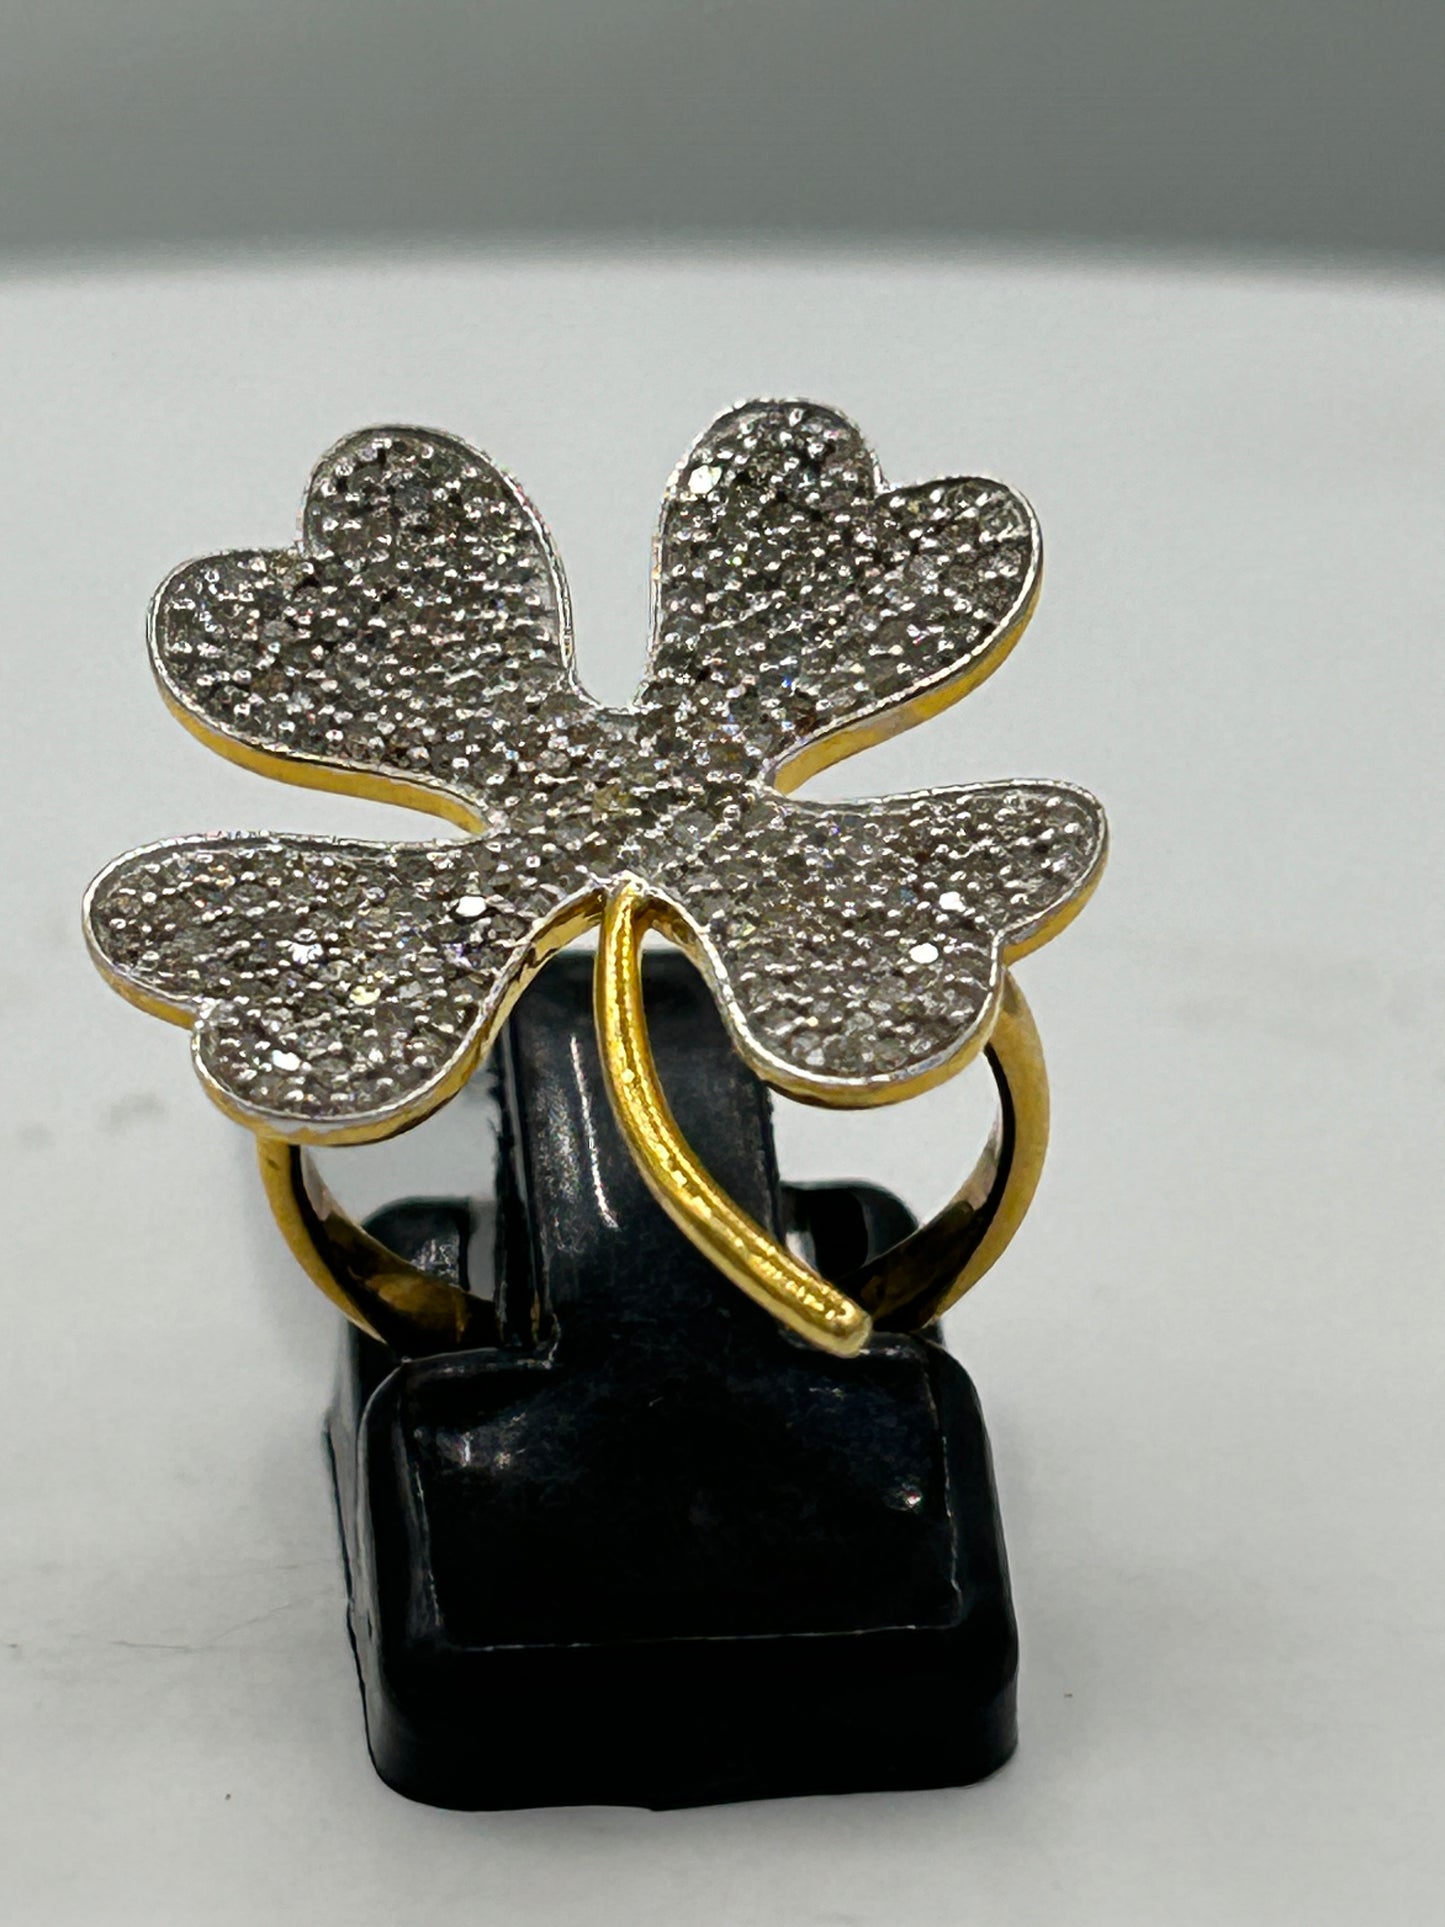 14k Solid Gold Flower Diamond Rings. Genuine handmade pave diamond Rings. Approx Size 1.04 "(26 x 26 mm)